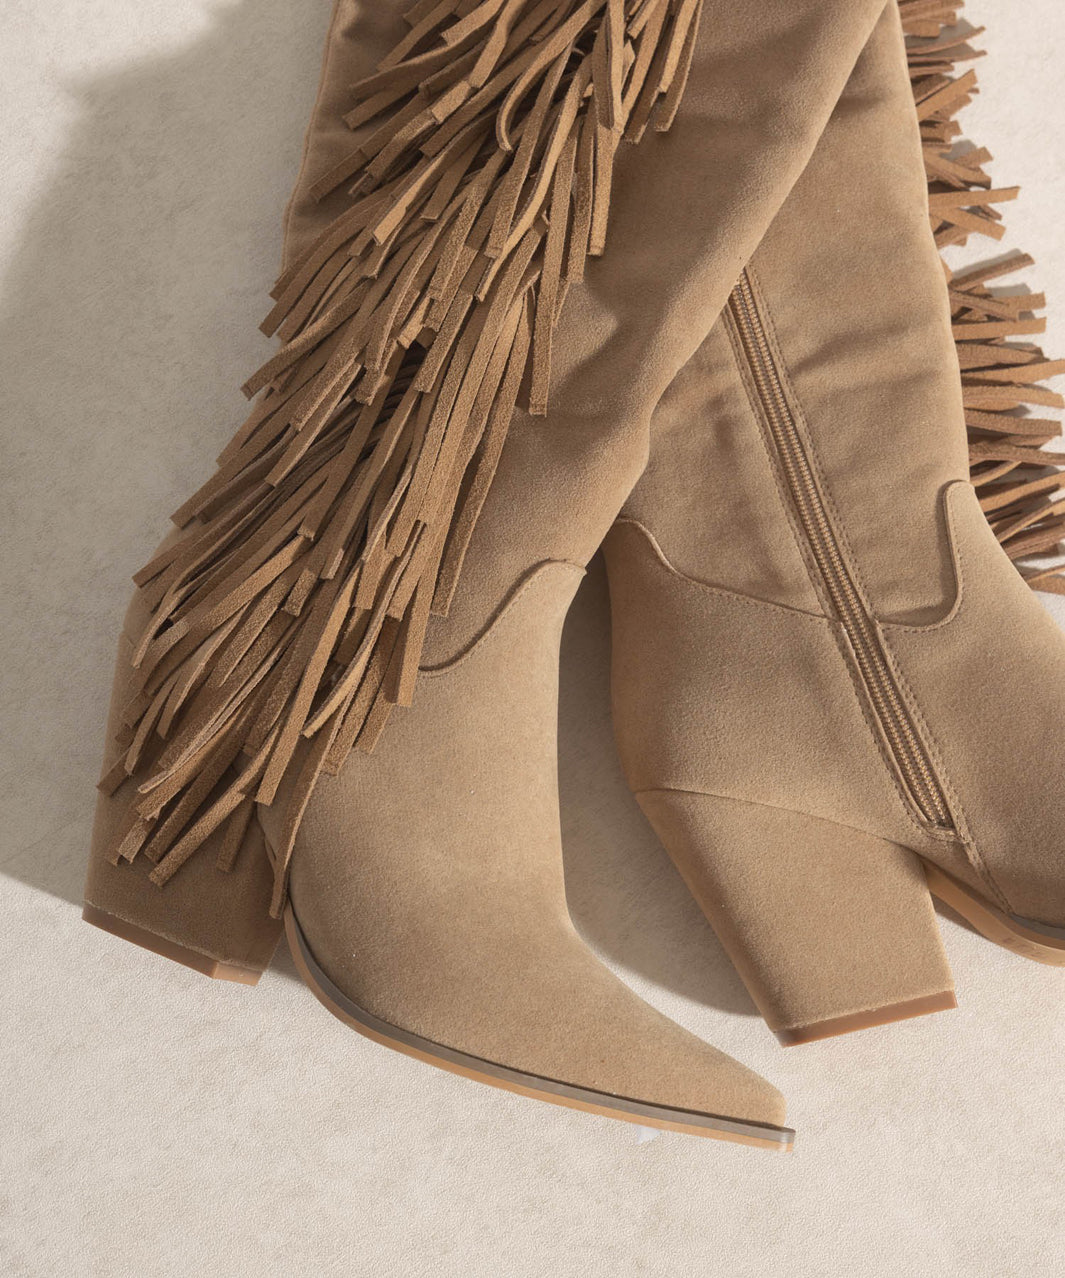 OASIS SOCIETY OUT WEST - Knee-High Fringe Boots - Azoroh